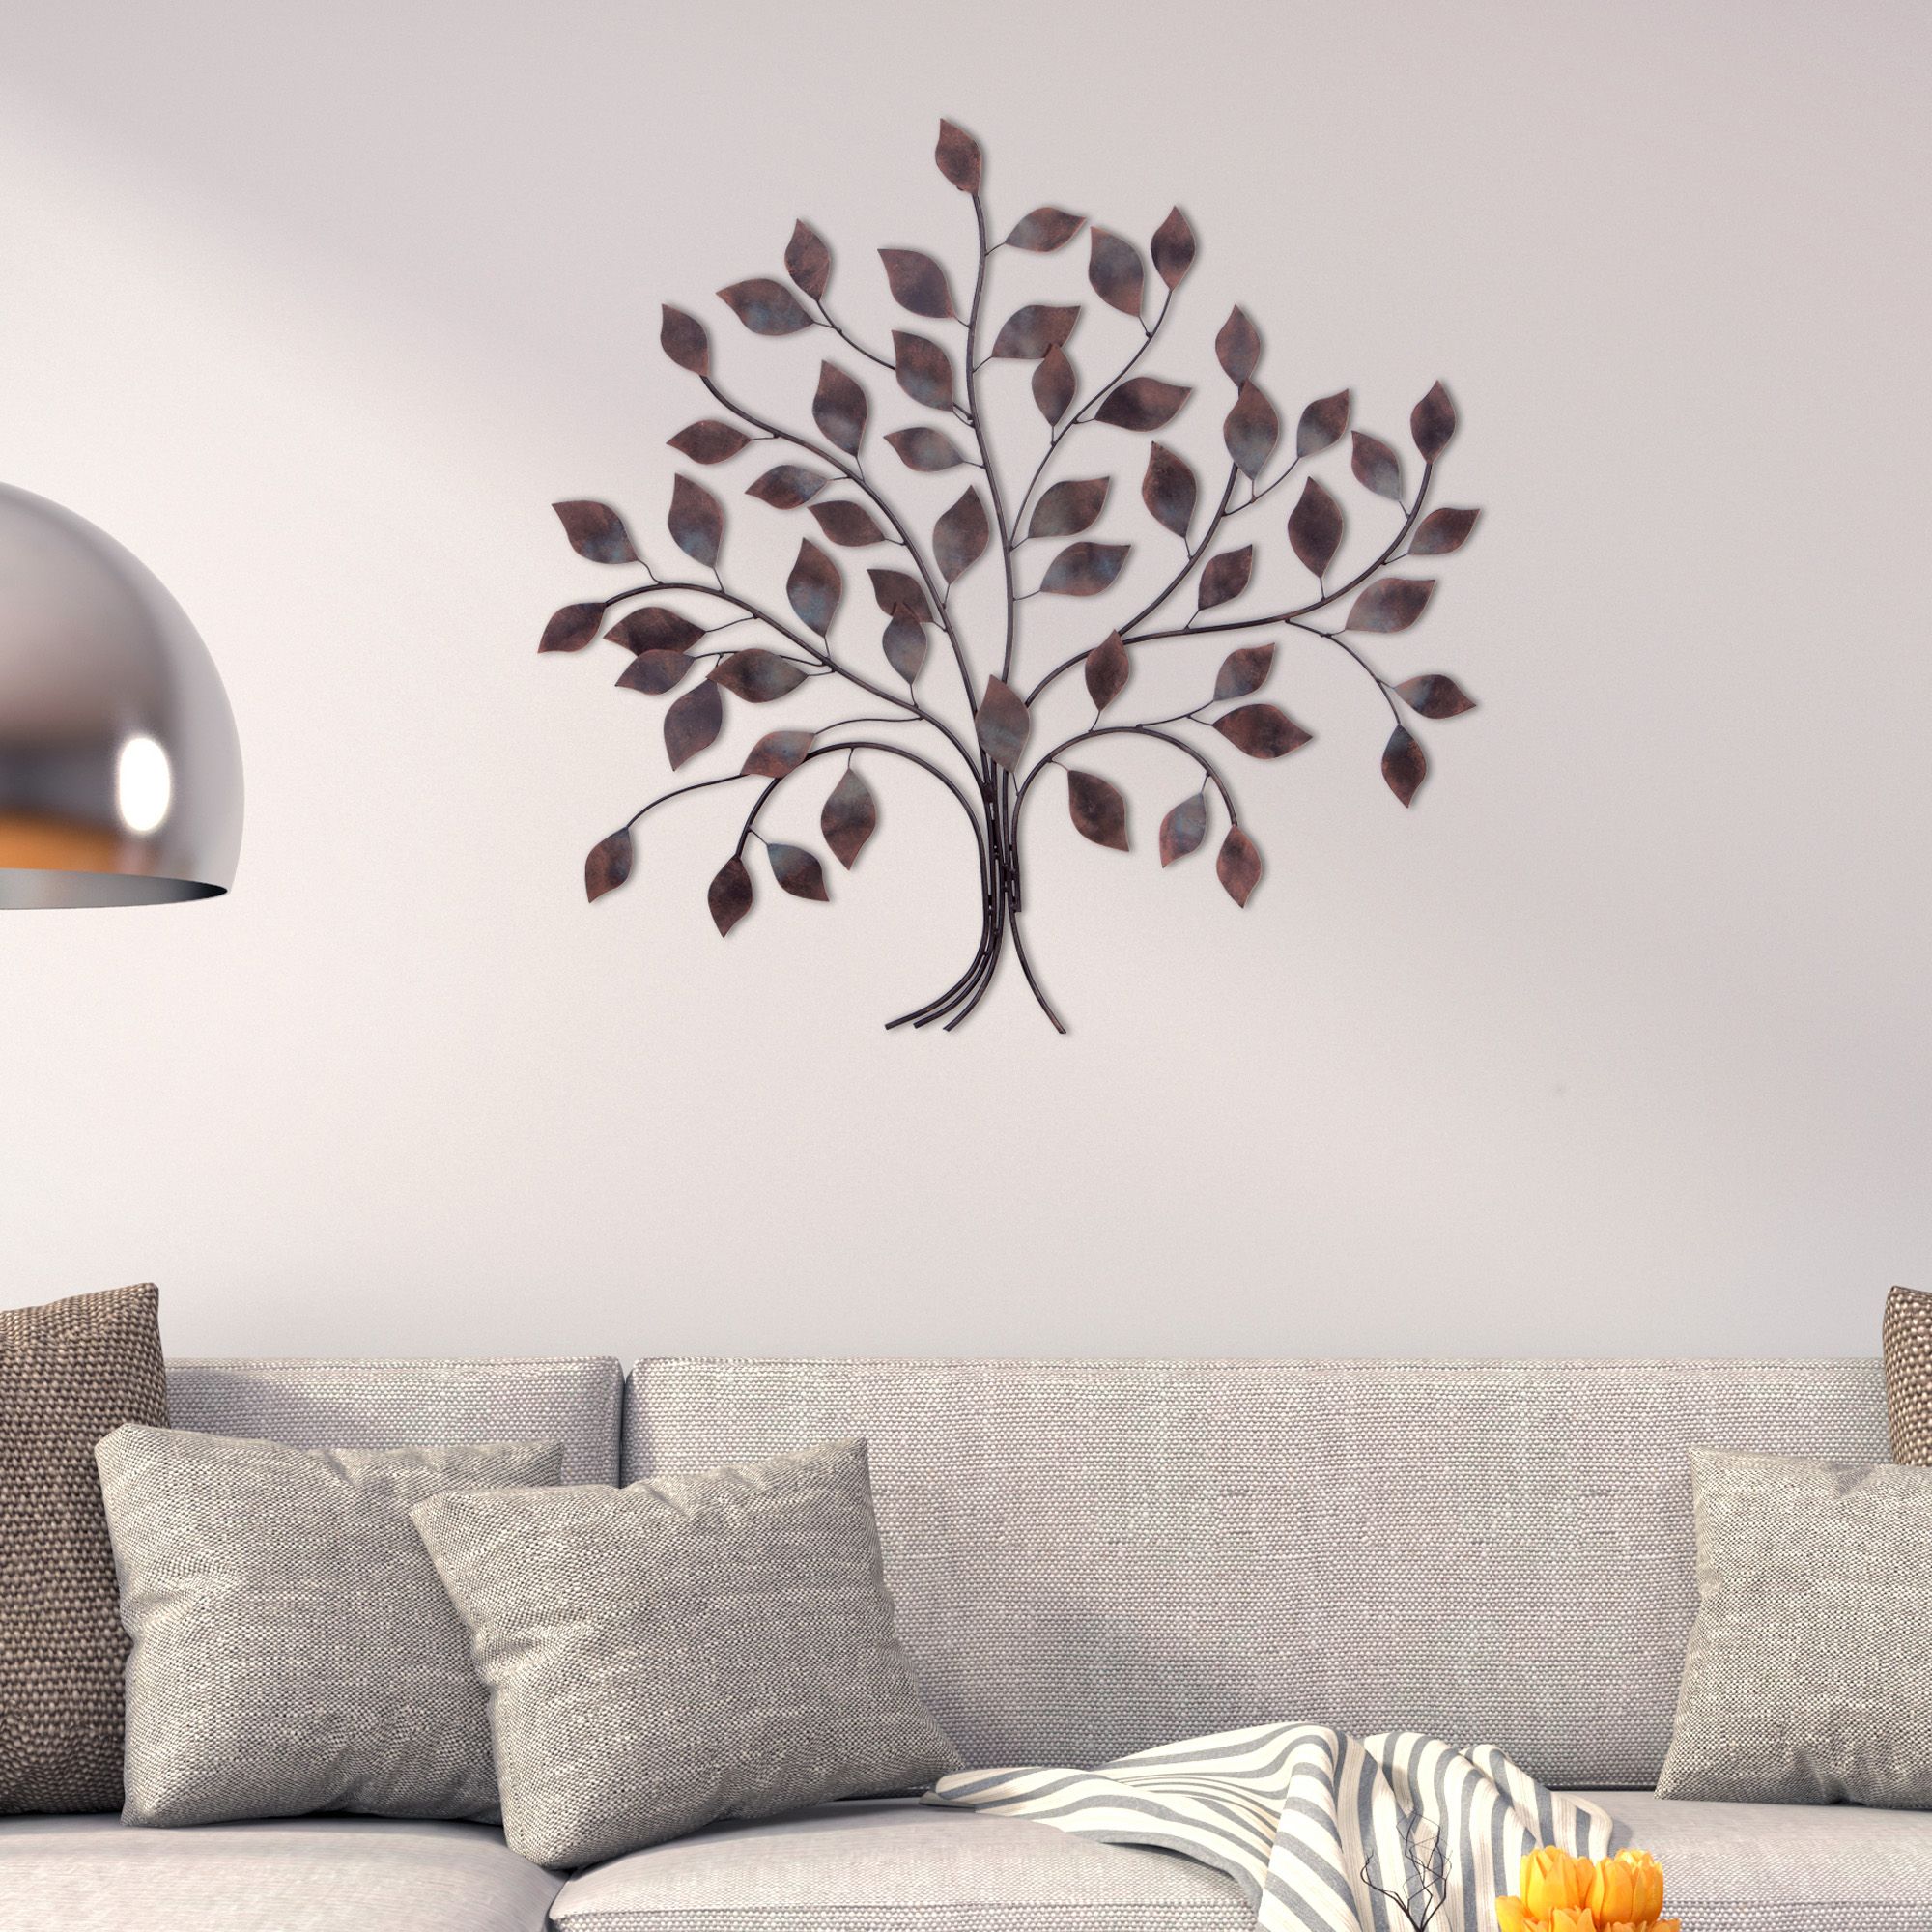 Patton Wall Decor Bronze Tree Branch Decorative Metal Wall Décor In Most Up To Date Fun Wall Art (View 10 of 20)